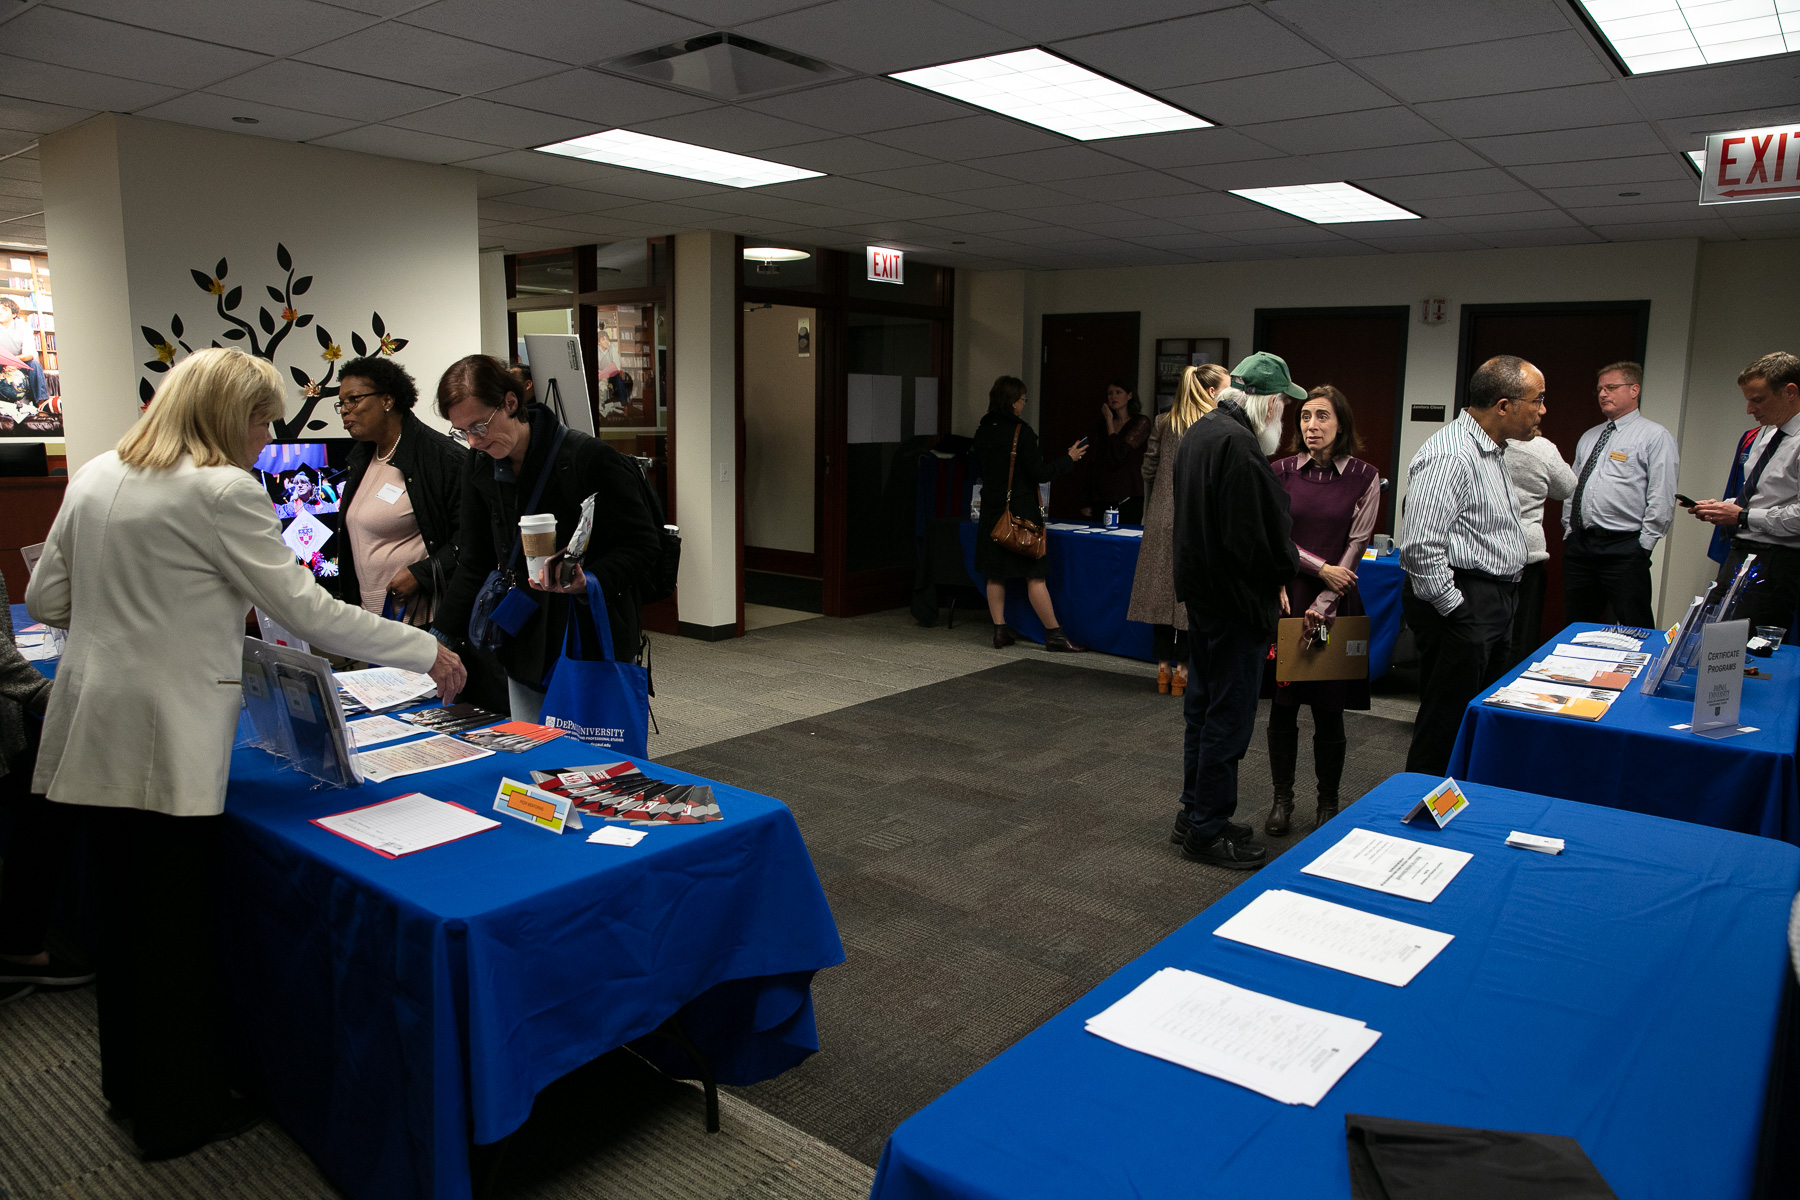 The School of Continuing and Professional Studies hosts its Fall Open House, Thursday, Oct. 17, 2019, at the Richard M. and Maggie C. Daley Building in DePaul’s Loop Campus. (DePaul University/Randall Spriggs)